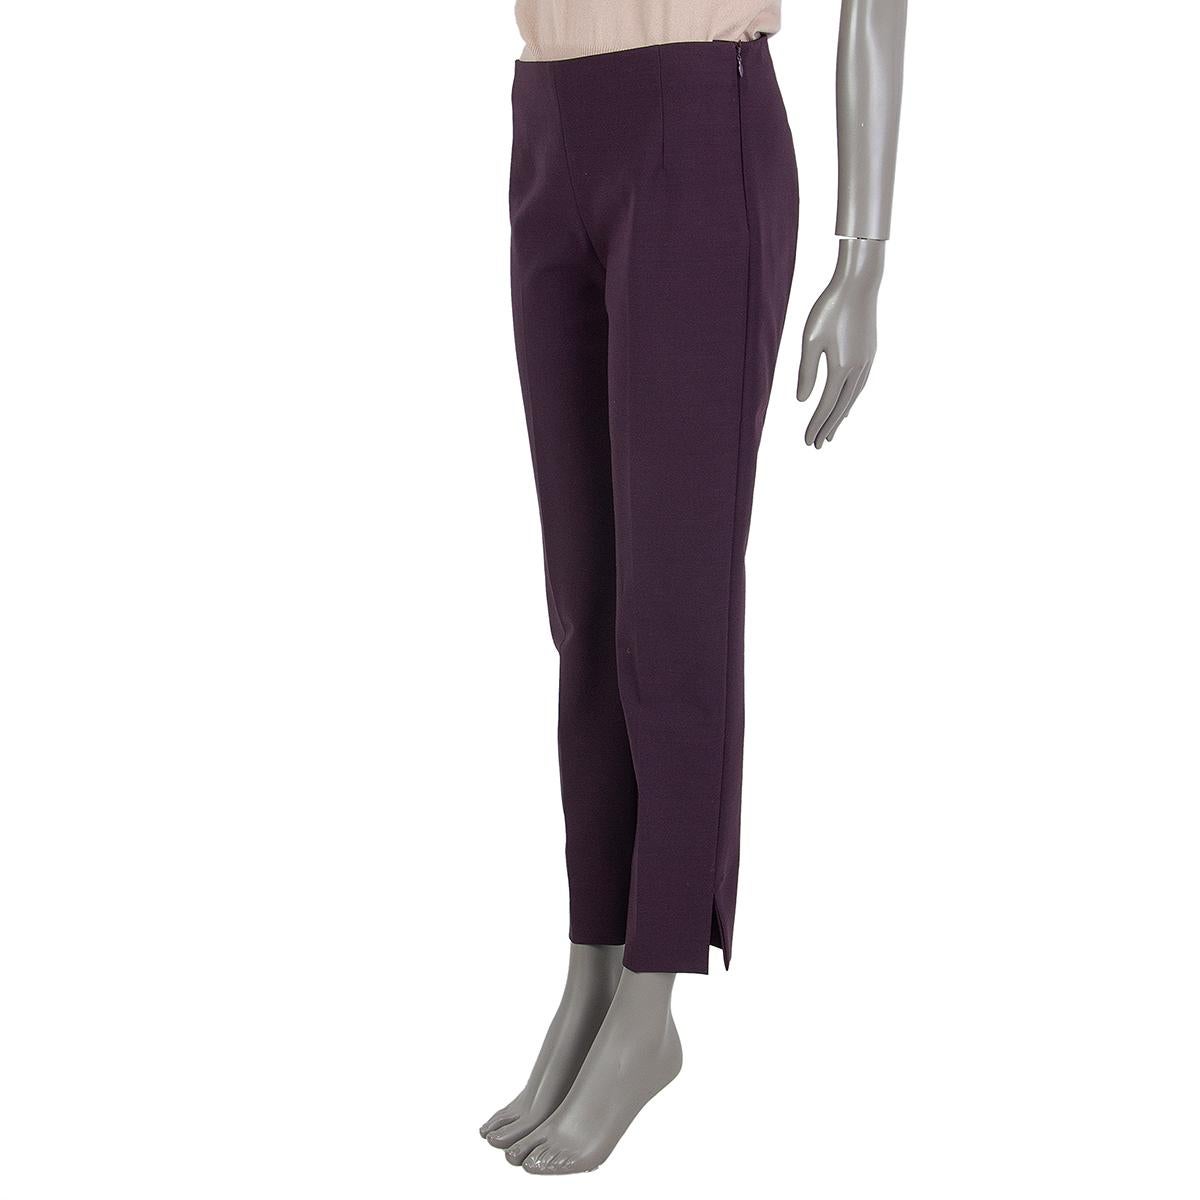 100% authentic Prada tapered pants in eggplant virgin wool (66%), polyester (20%), nylon (10%) and elastane (4%). Closes on the side with a concealed zipper. Unlined. Have been worn and are in excellent condition. 

Measurements
Tag